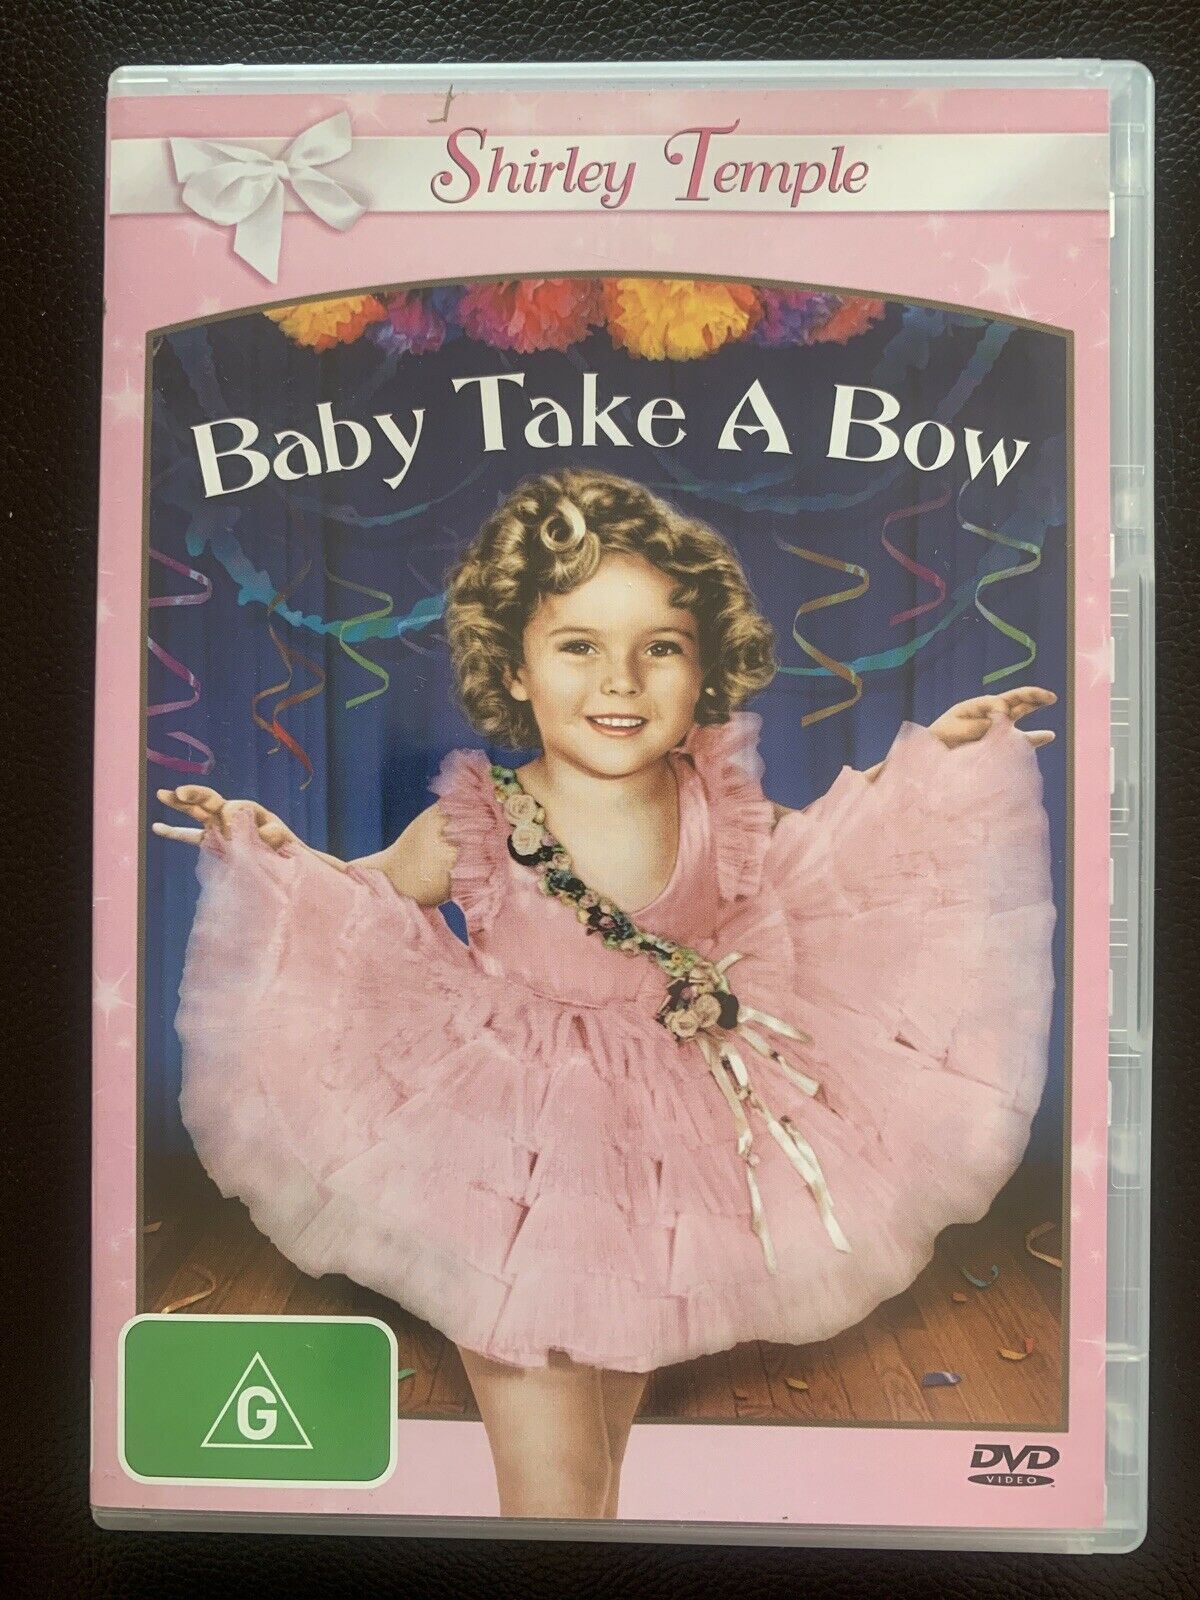 Baby, Take A Bow (DVD, 1934) Shirley Temple. Region 4